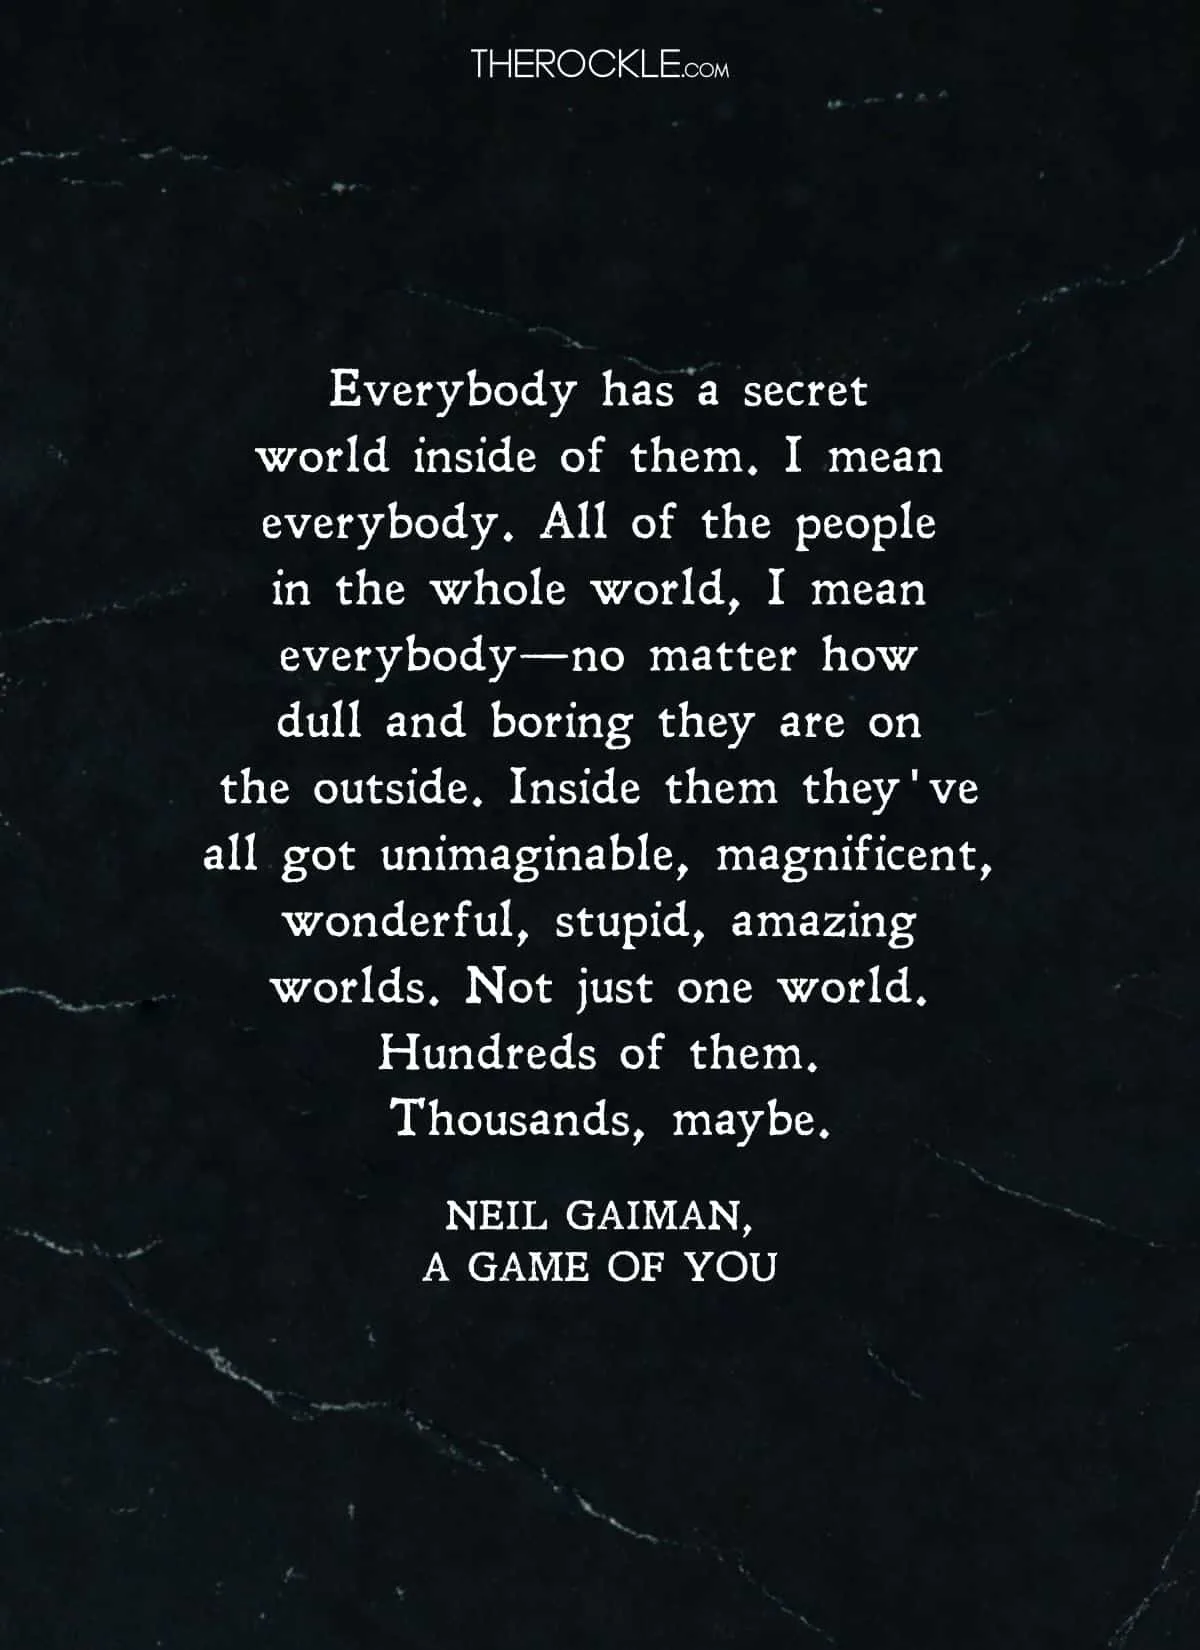 Neil Gaiman's quote about people's inner worlds from the book A Game of You